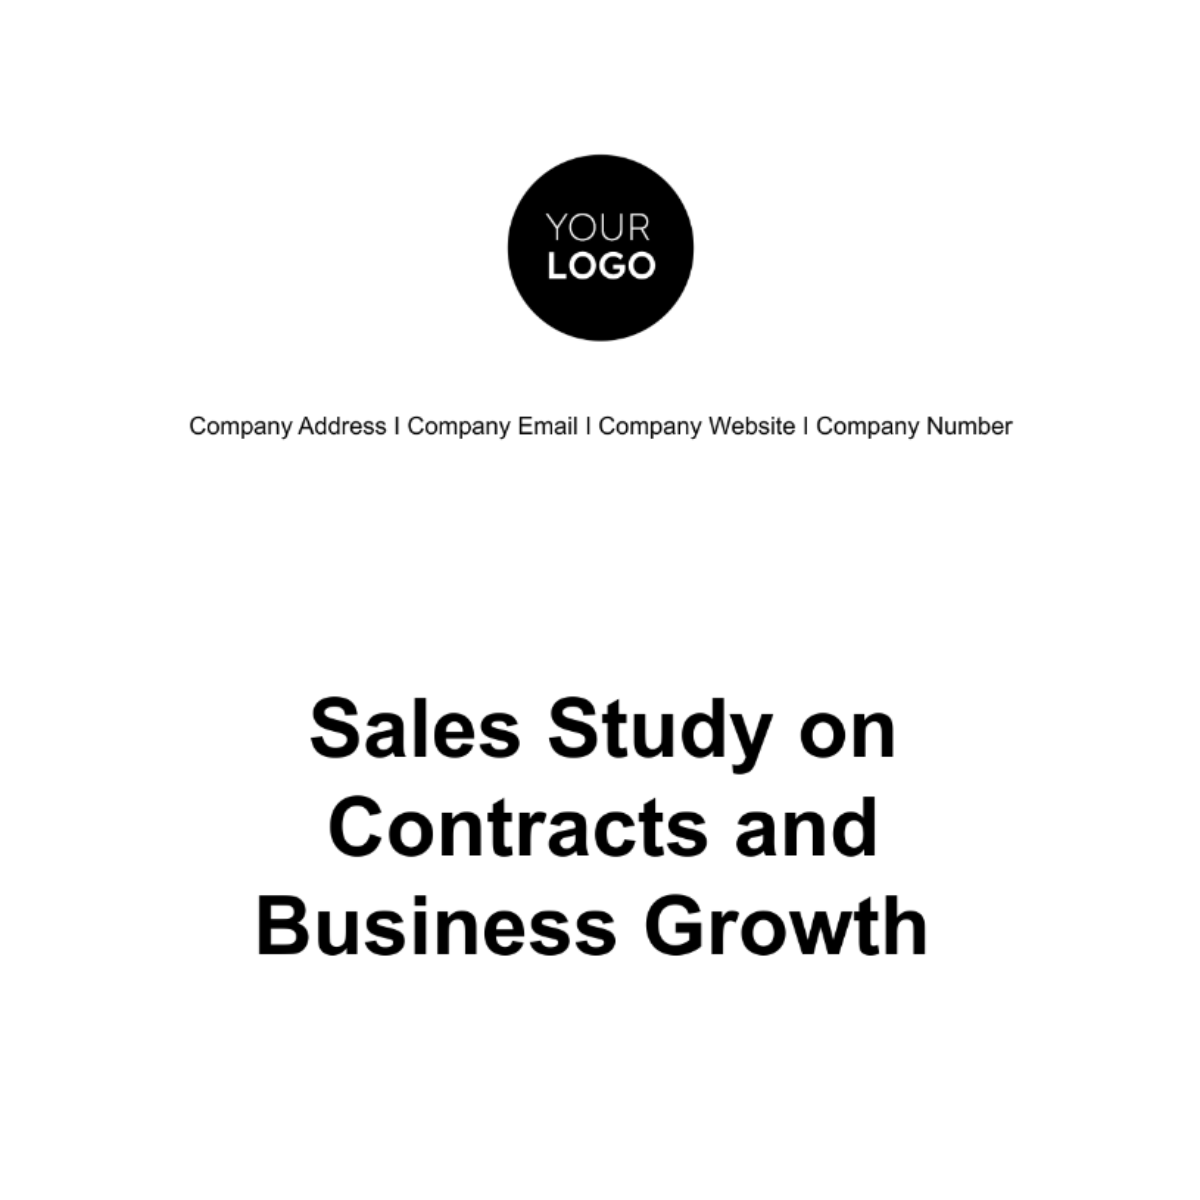 Free Sales Study on Contracts and Business Growth Template